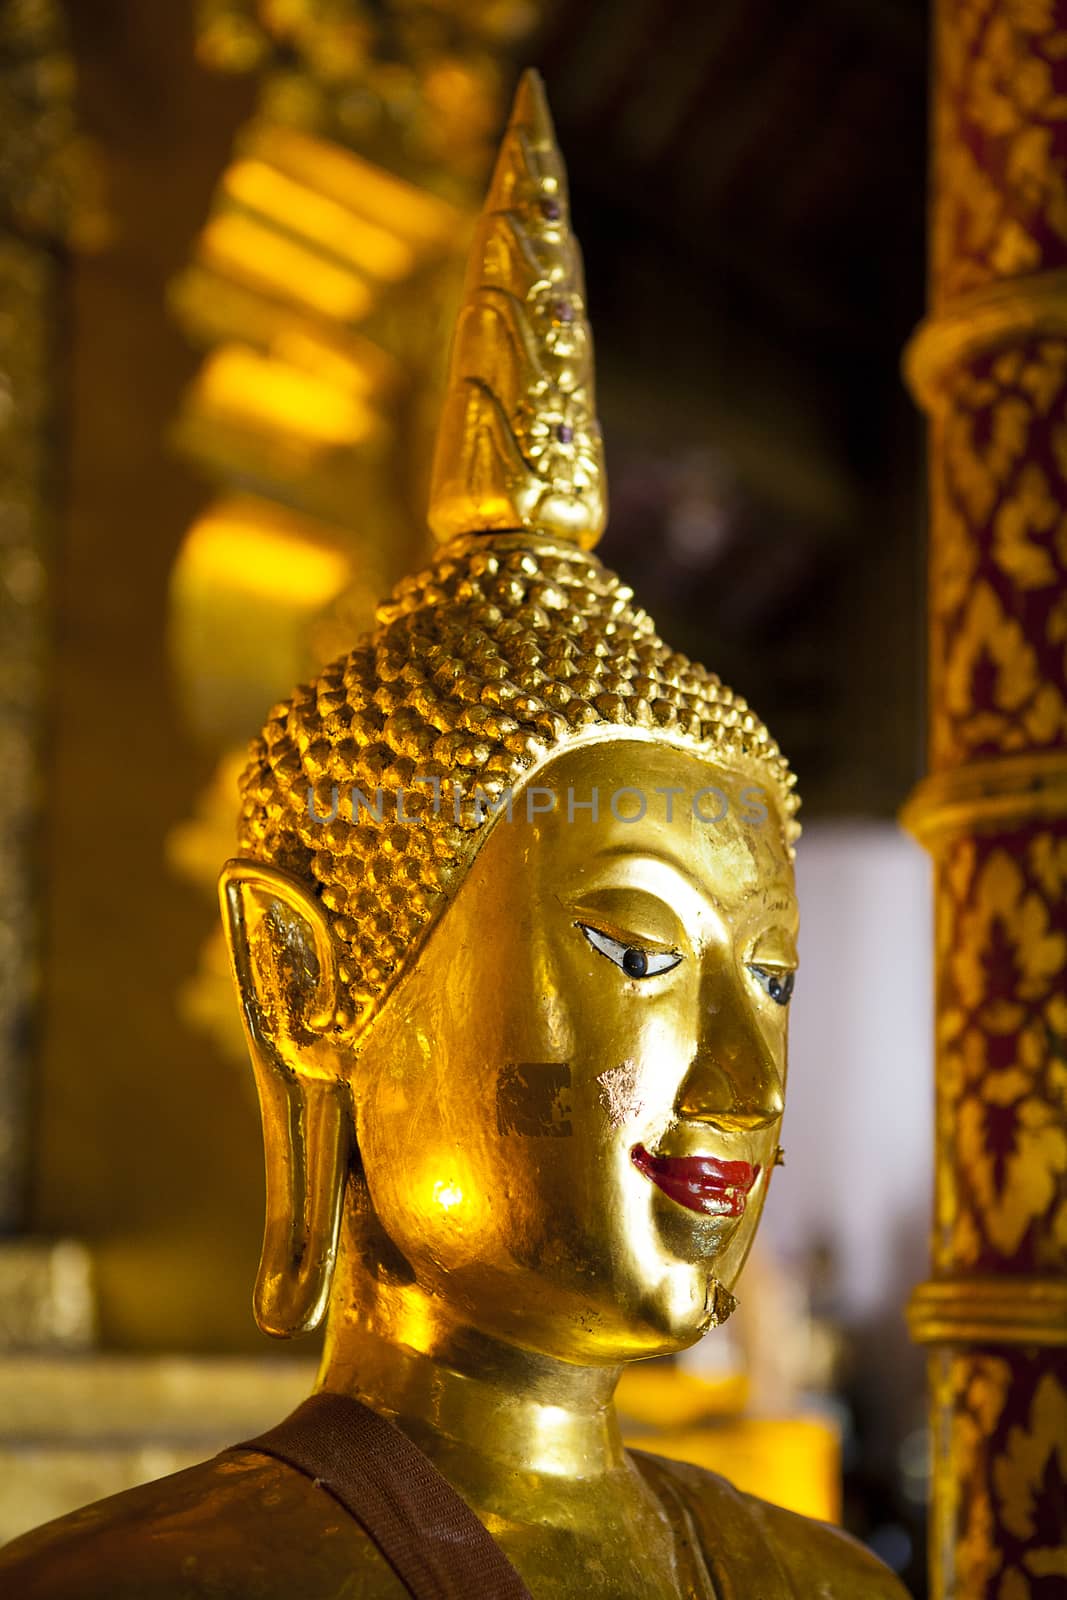 Buddha is revered by Buddhists. To commemorate the Buddha's teachings as always.